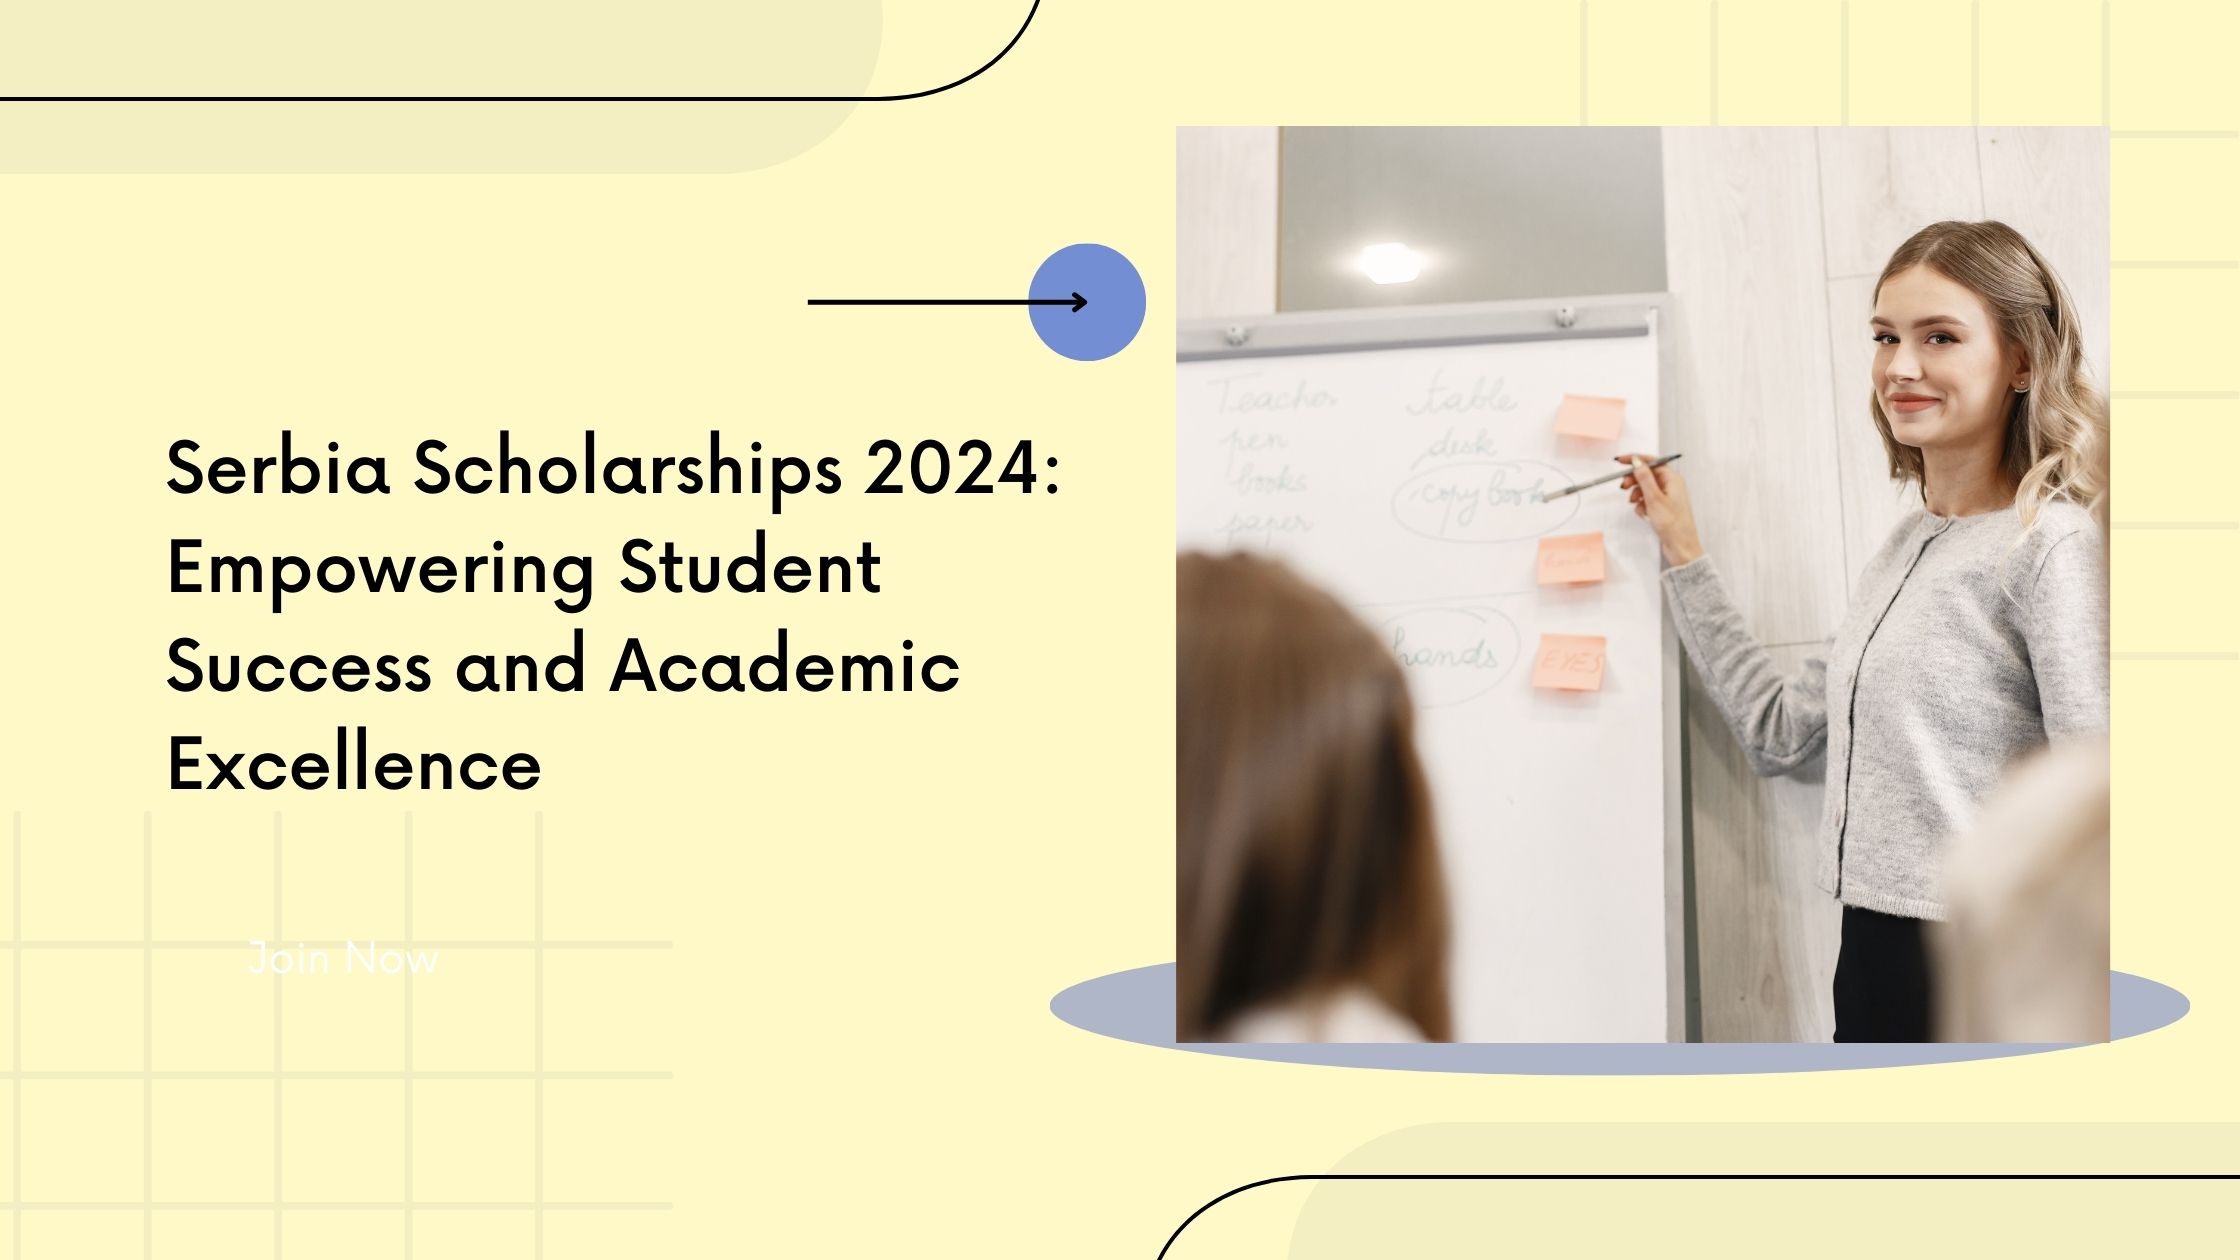 Serbia Scholarships 2024 Empowering Student Success and Academic Excellence